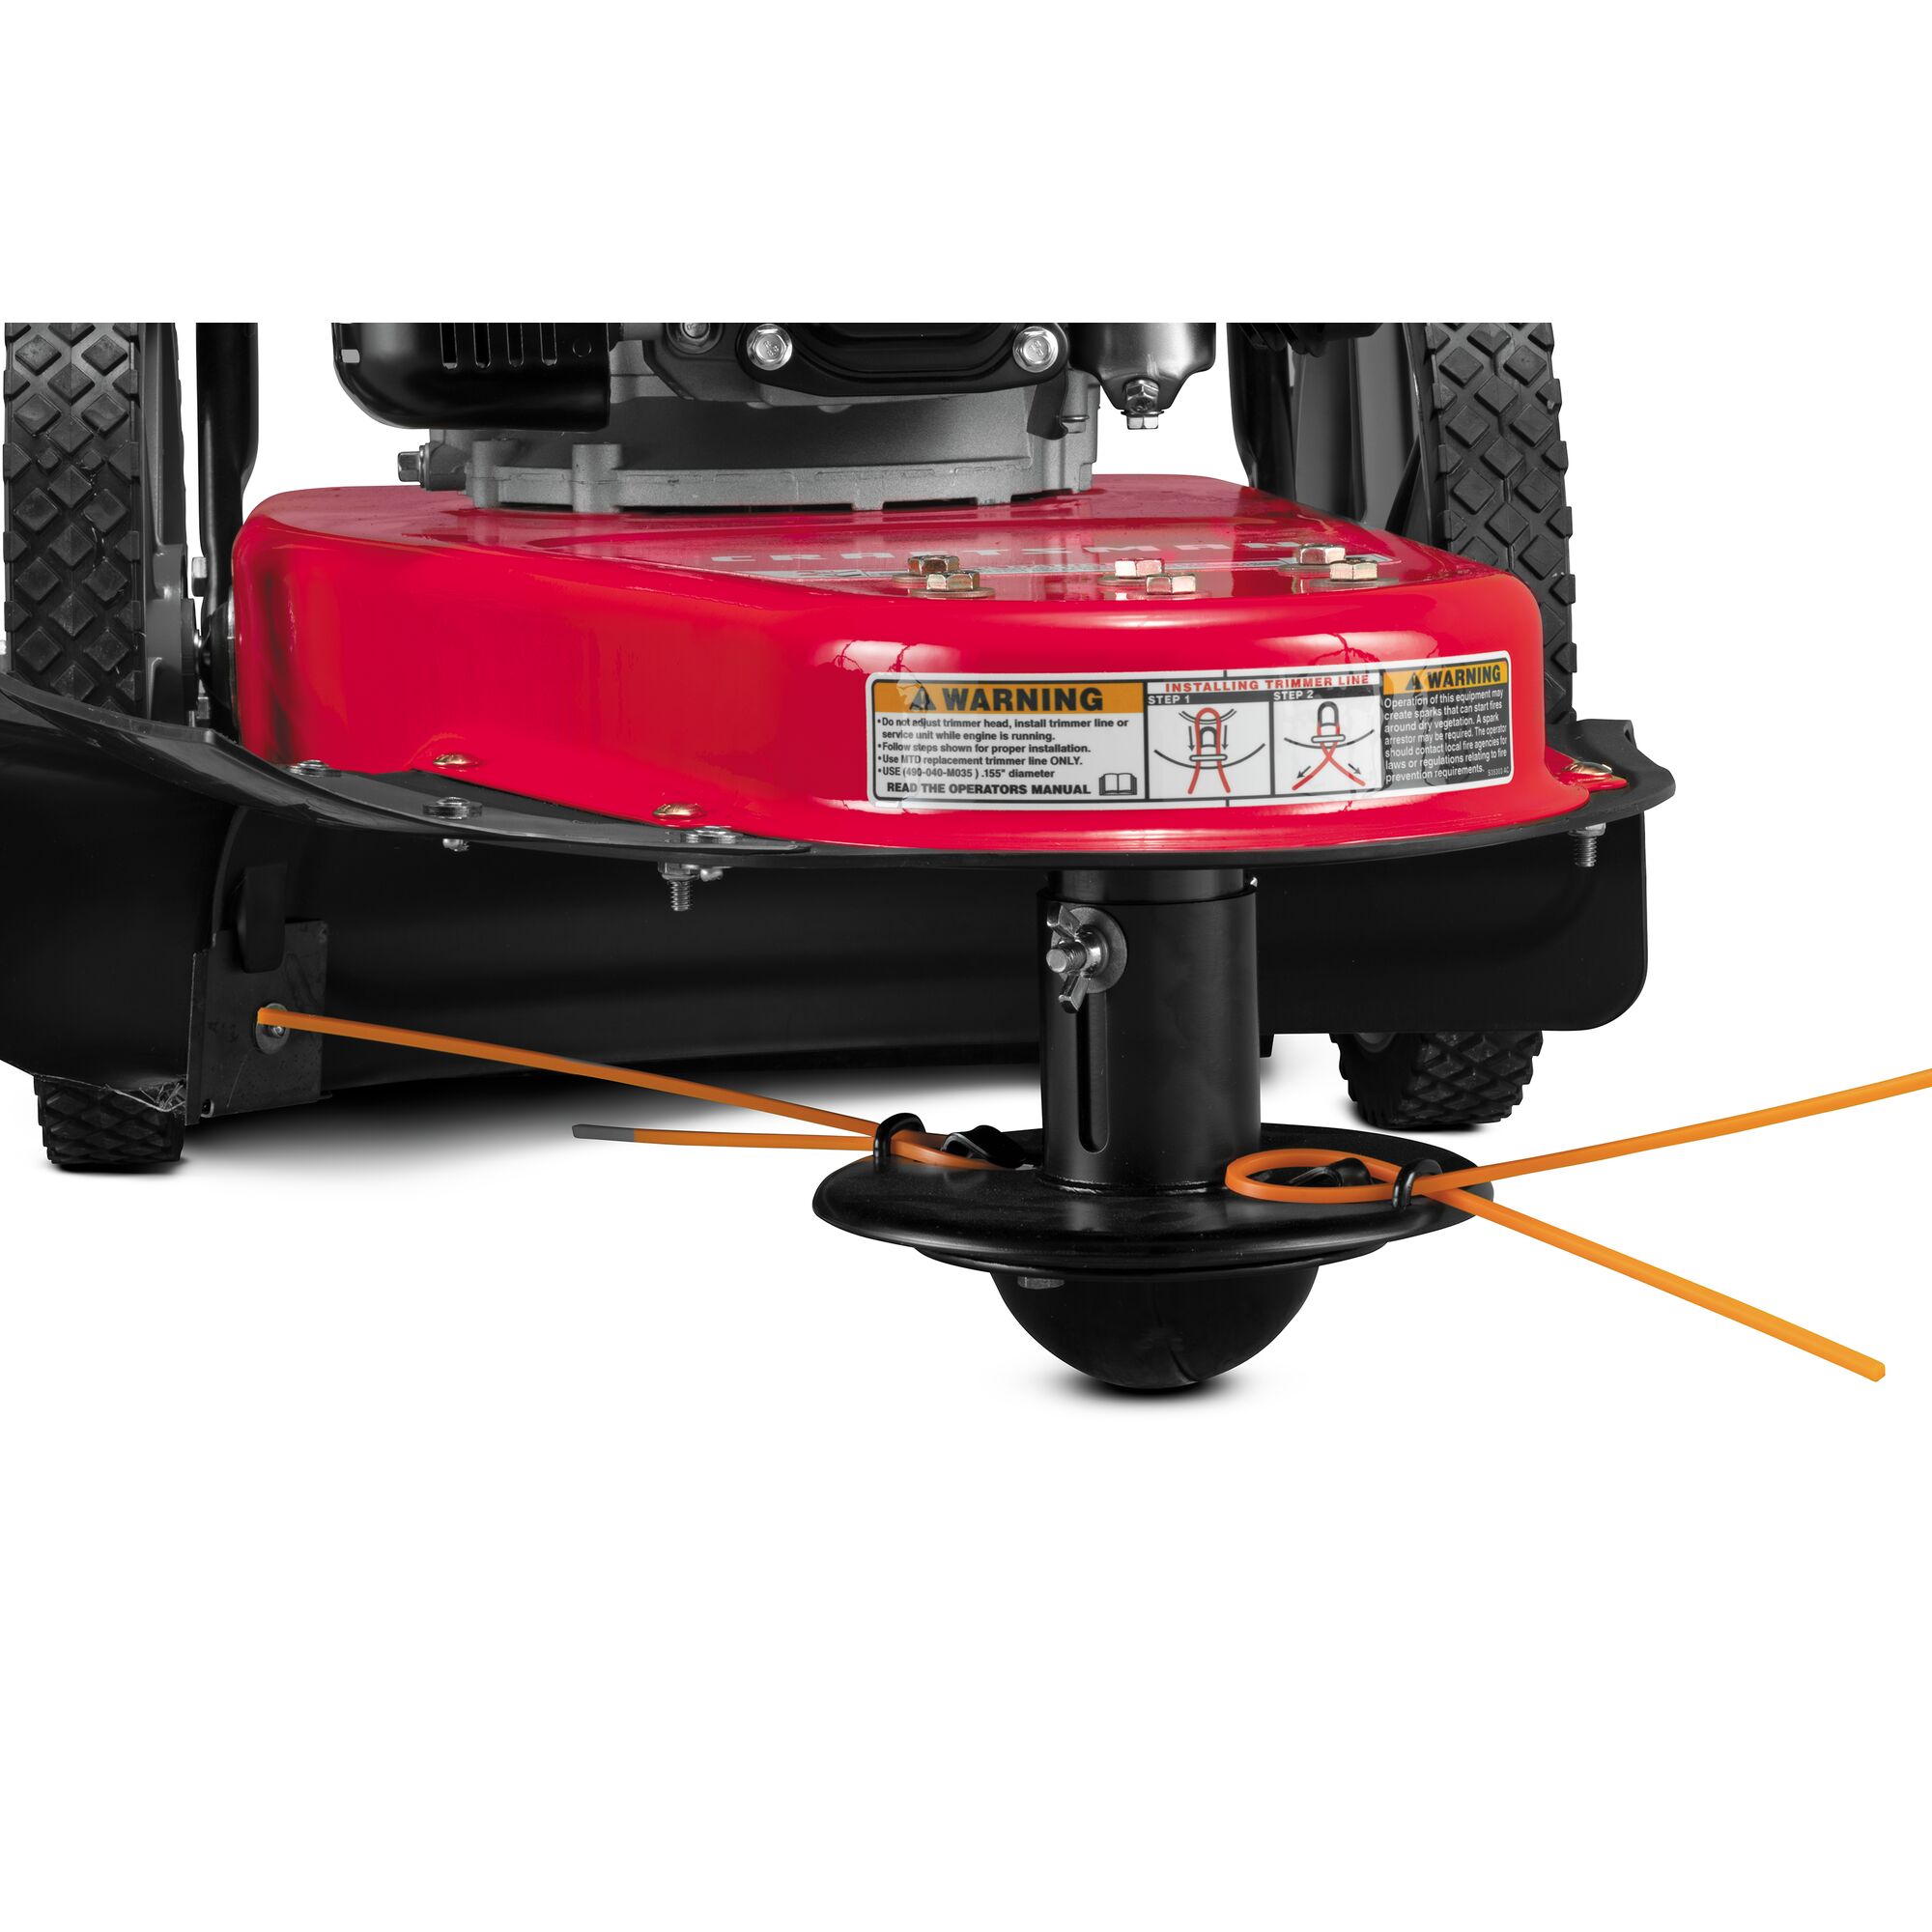 Trimmer feature of Wheeled string trimmer.